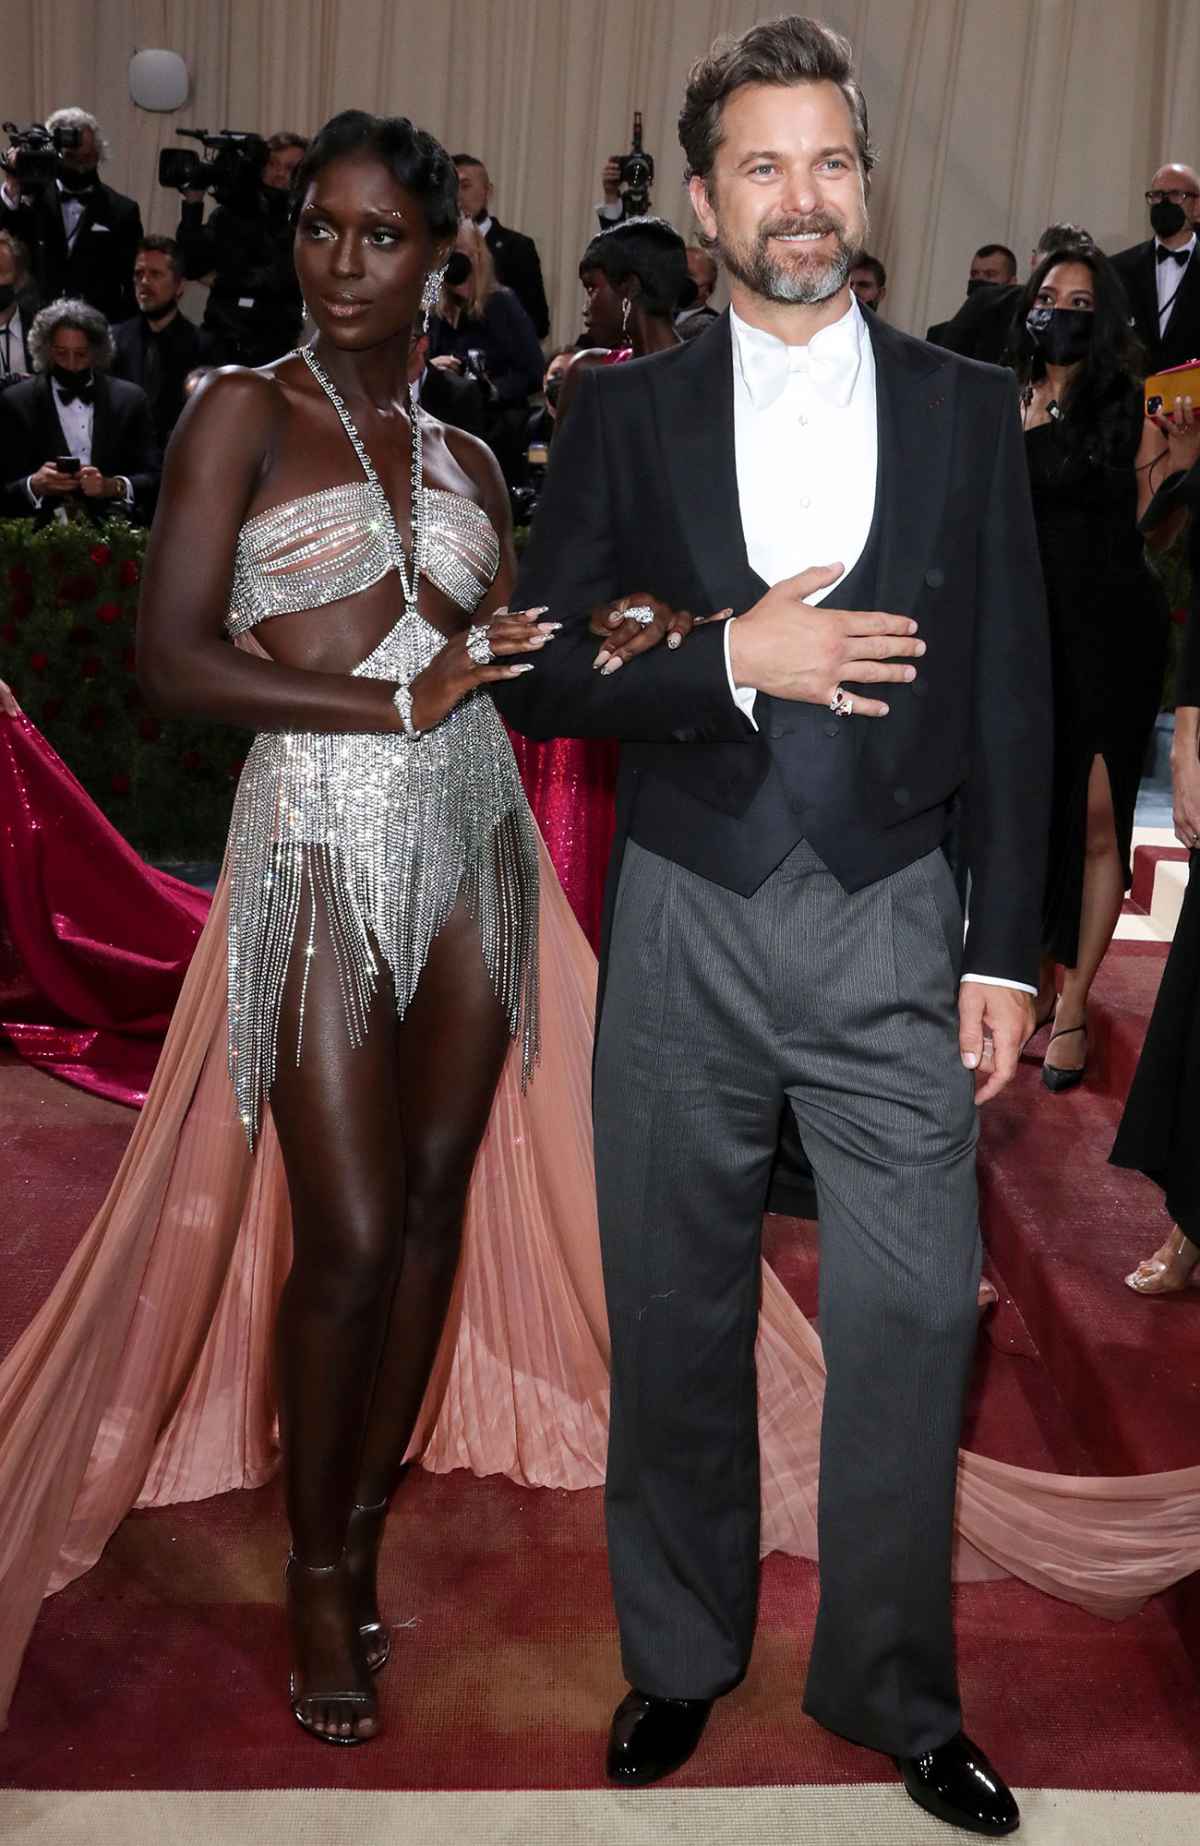 Met Gala 2022: Blake Lively, Ryan Reynolds and More Hot Couples